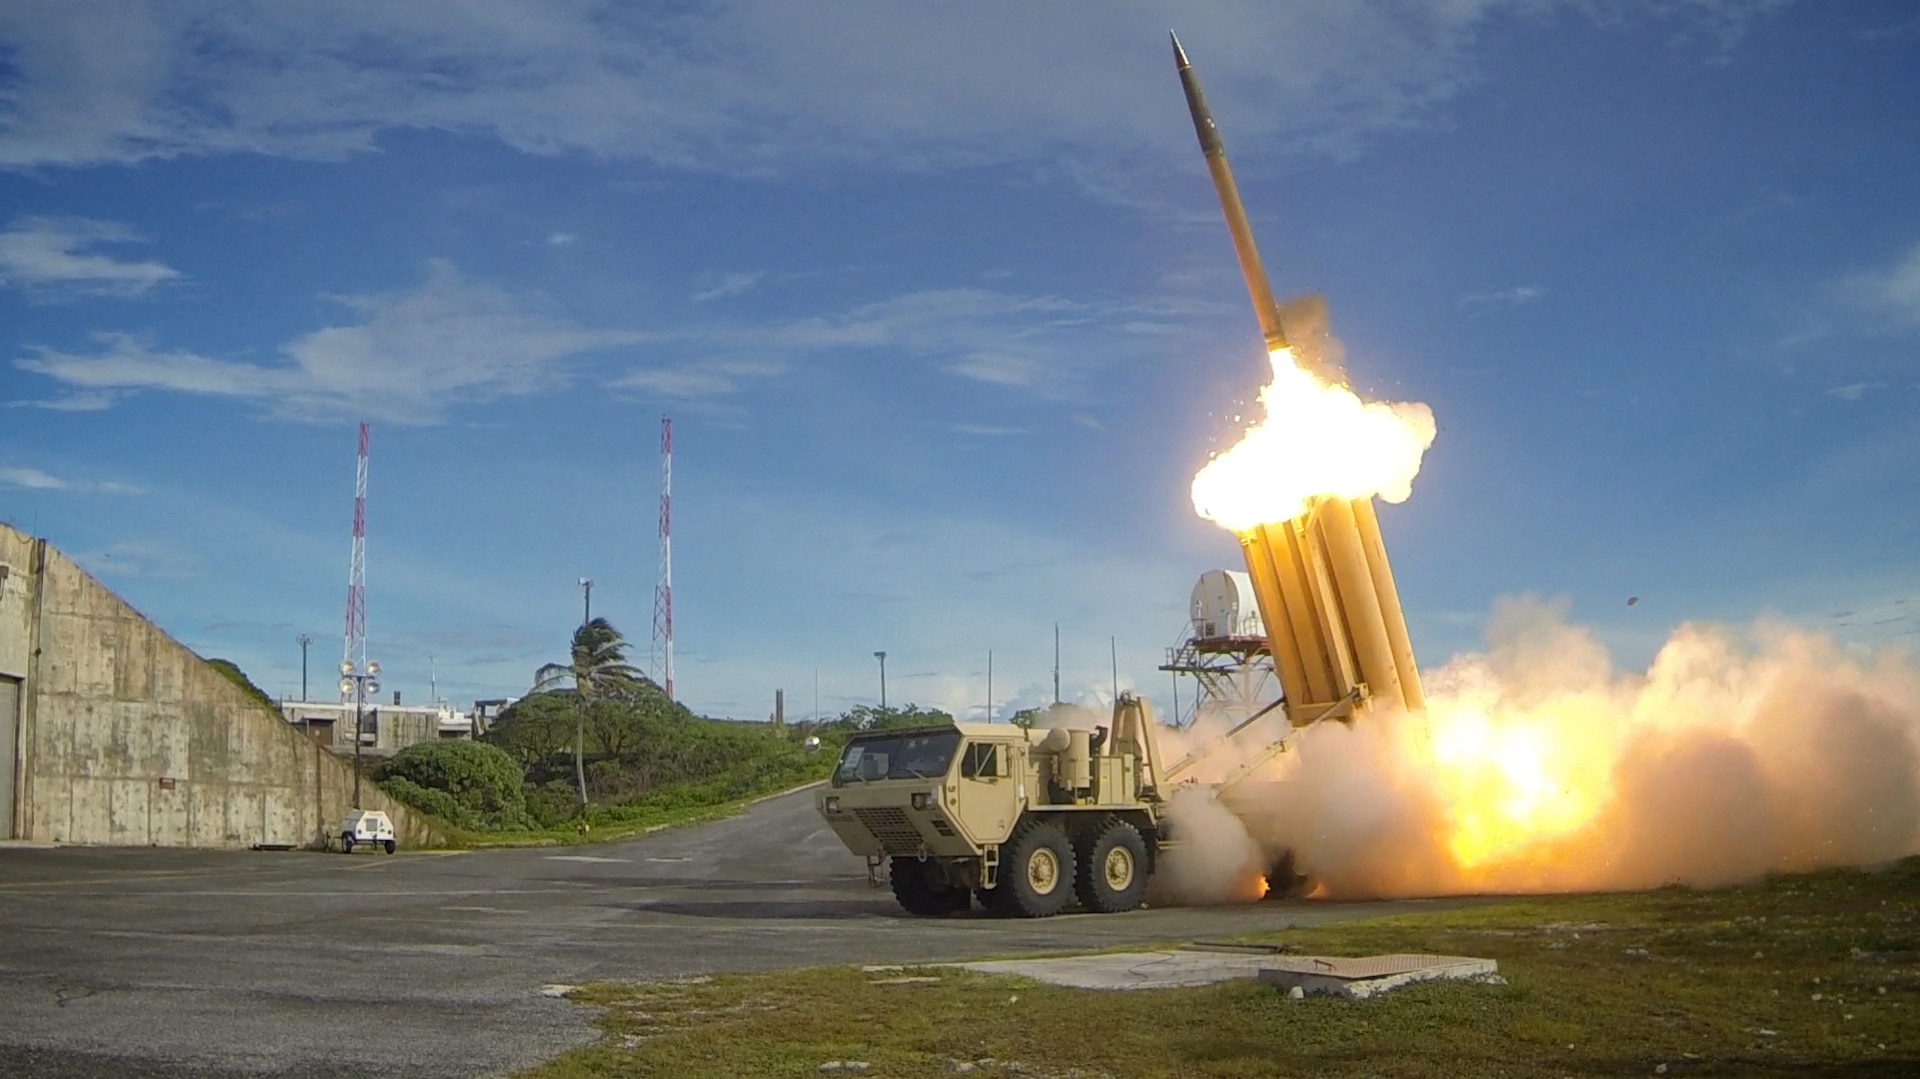 In this file photo, two THAAD interceptors and a Standard-Missile 3 Block IA missile were launched resulting in the intercept of two near-simultaneous medium-range ballistic missile targets during designated Flight Test Operational-01 (FTO-01) on September 10, 2013 in the vicinity of the U.S. Army Kwajalein Atoll/ Reagan Test Site and surrounding areas in the western Pacific. The test demonstrated the ability of the Aegis BMD and THAA